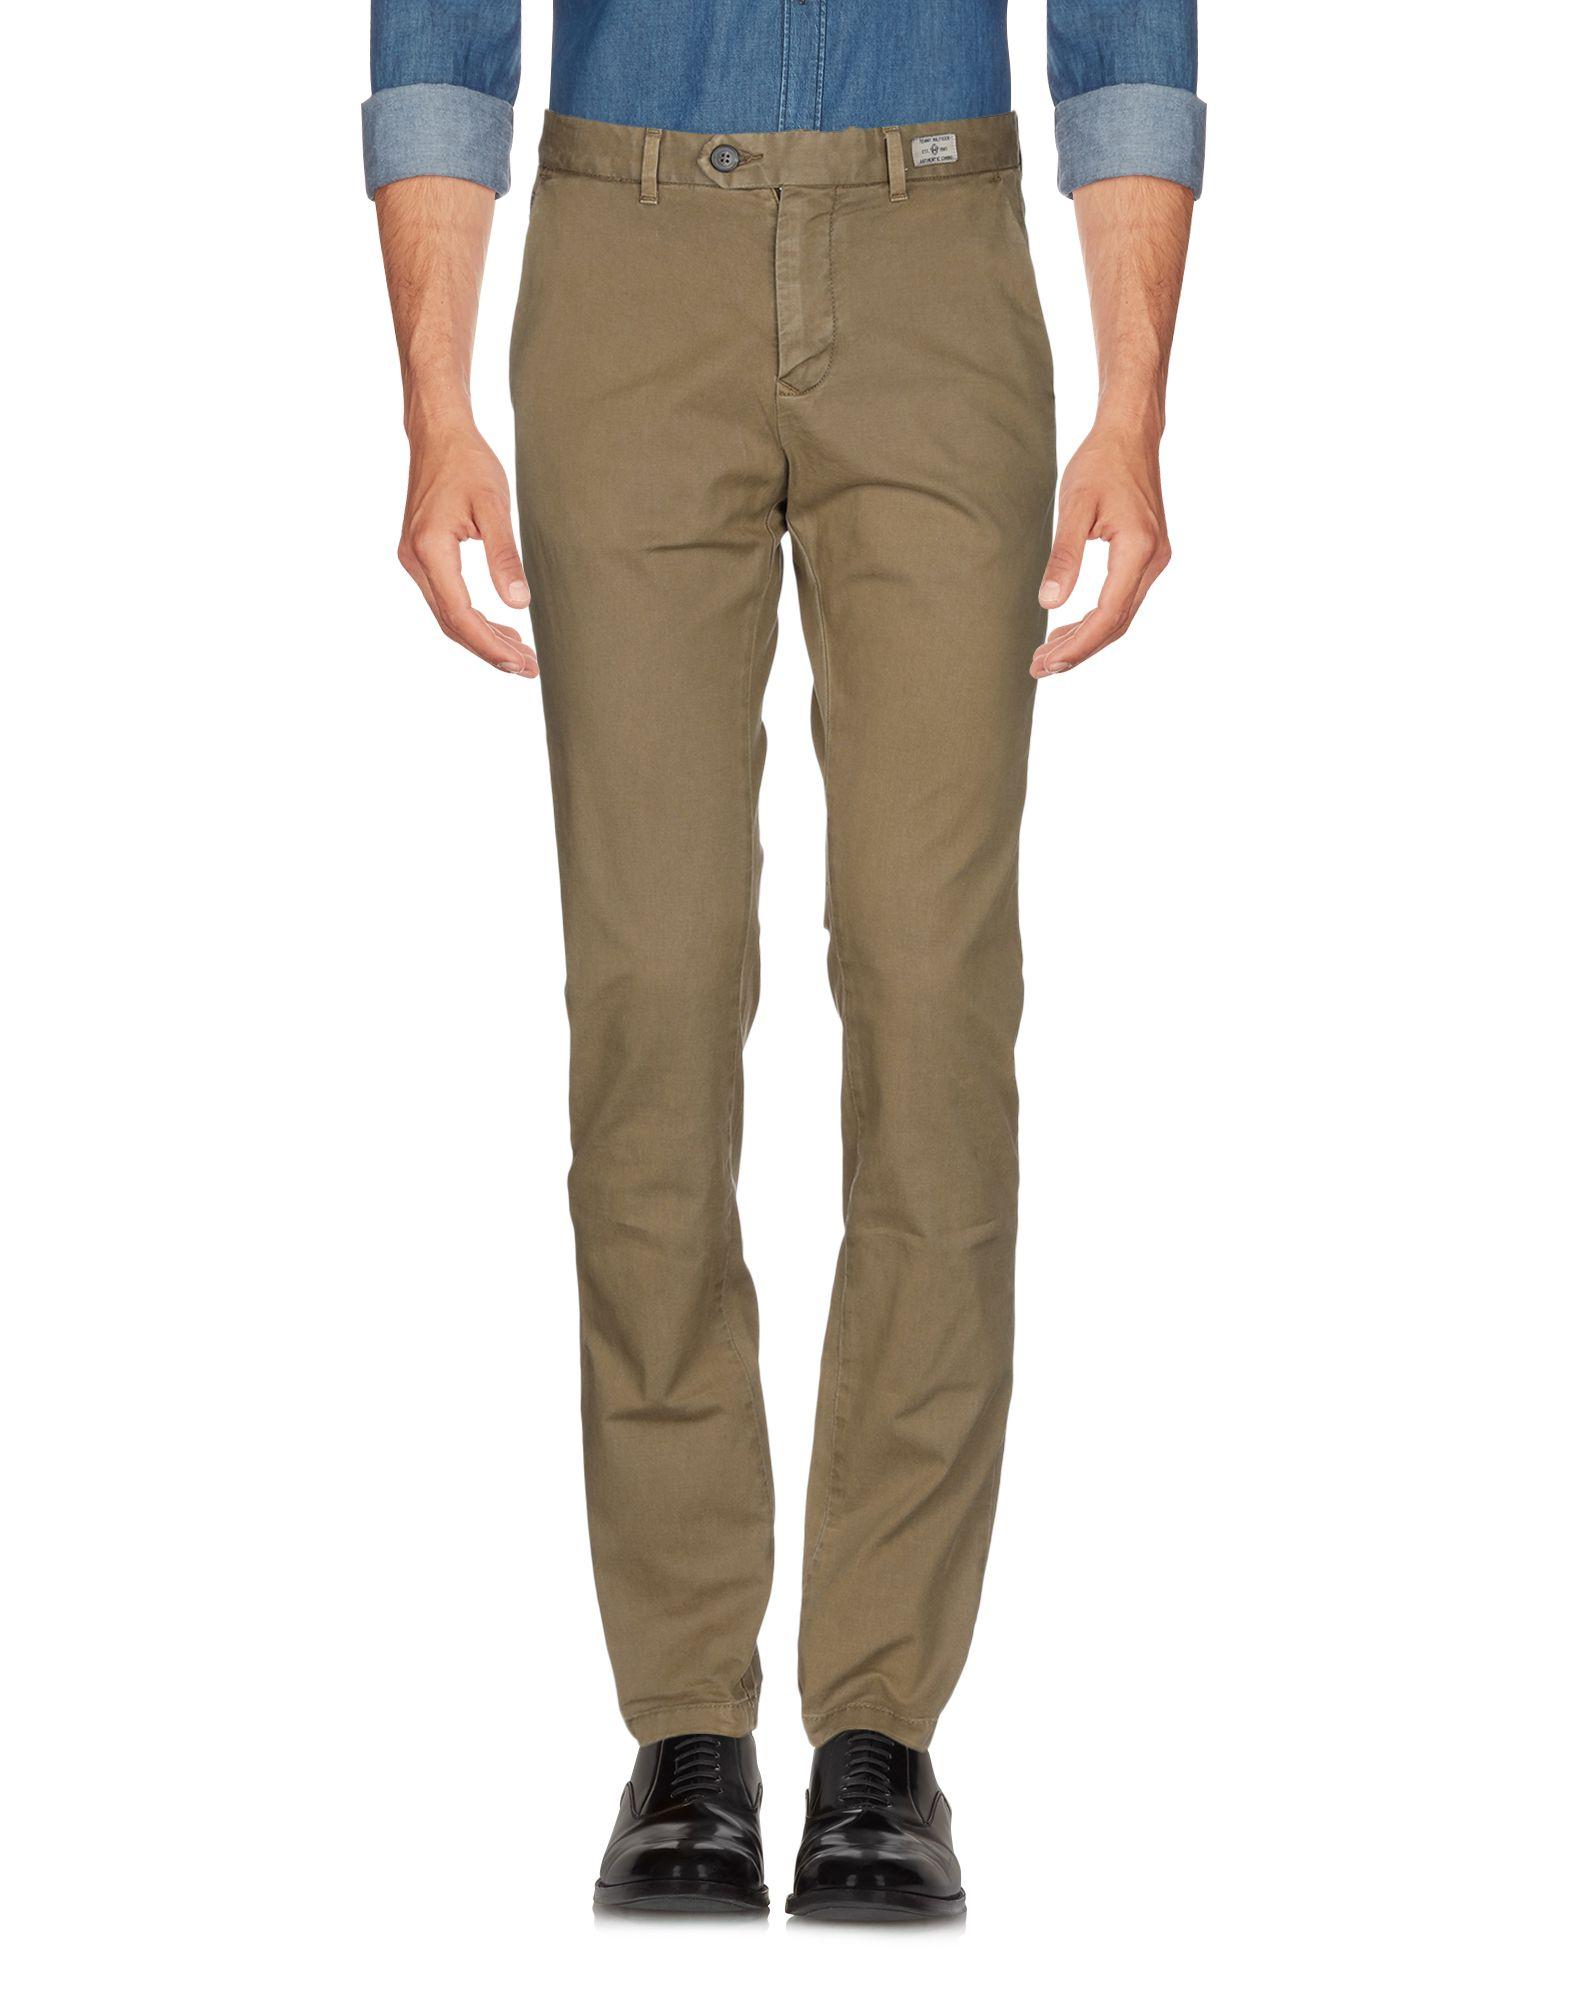 Tommy Hilfiger Cotton Casual Pants in Military Green (Green) for Men - Lyst